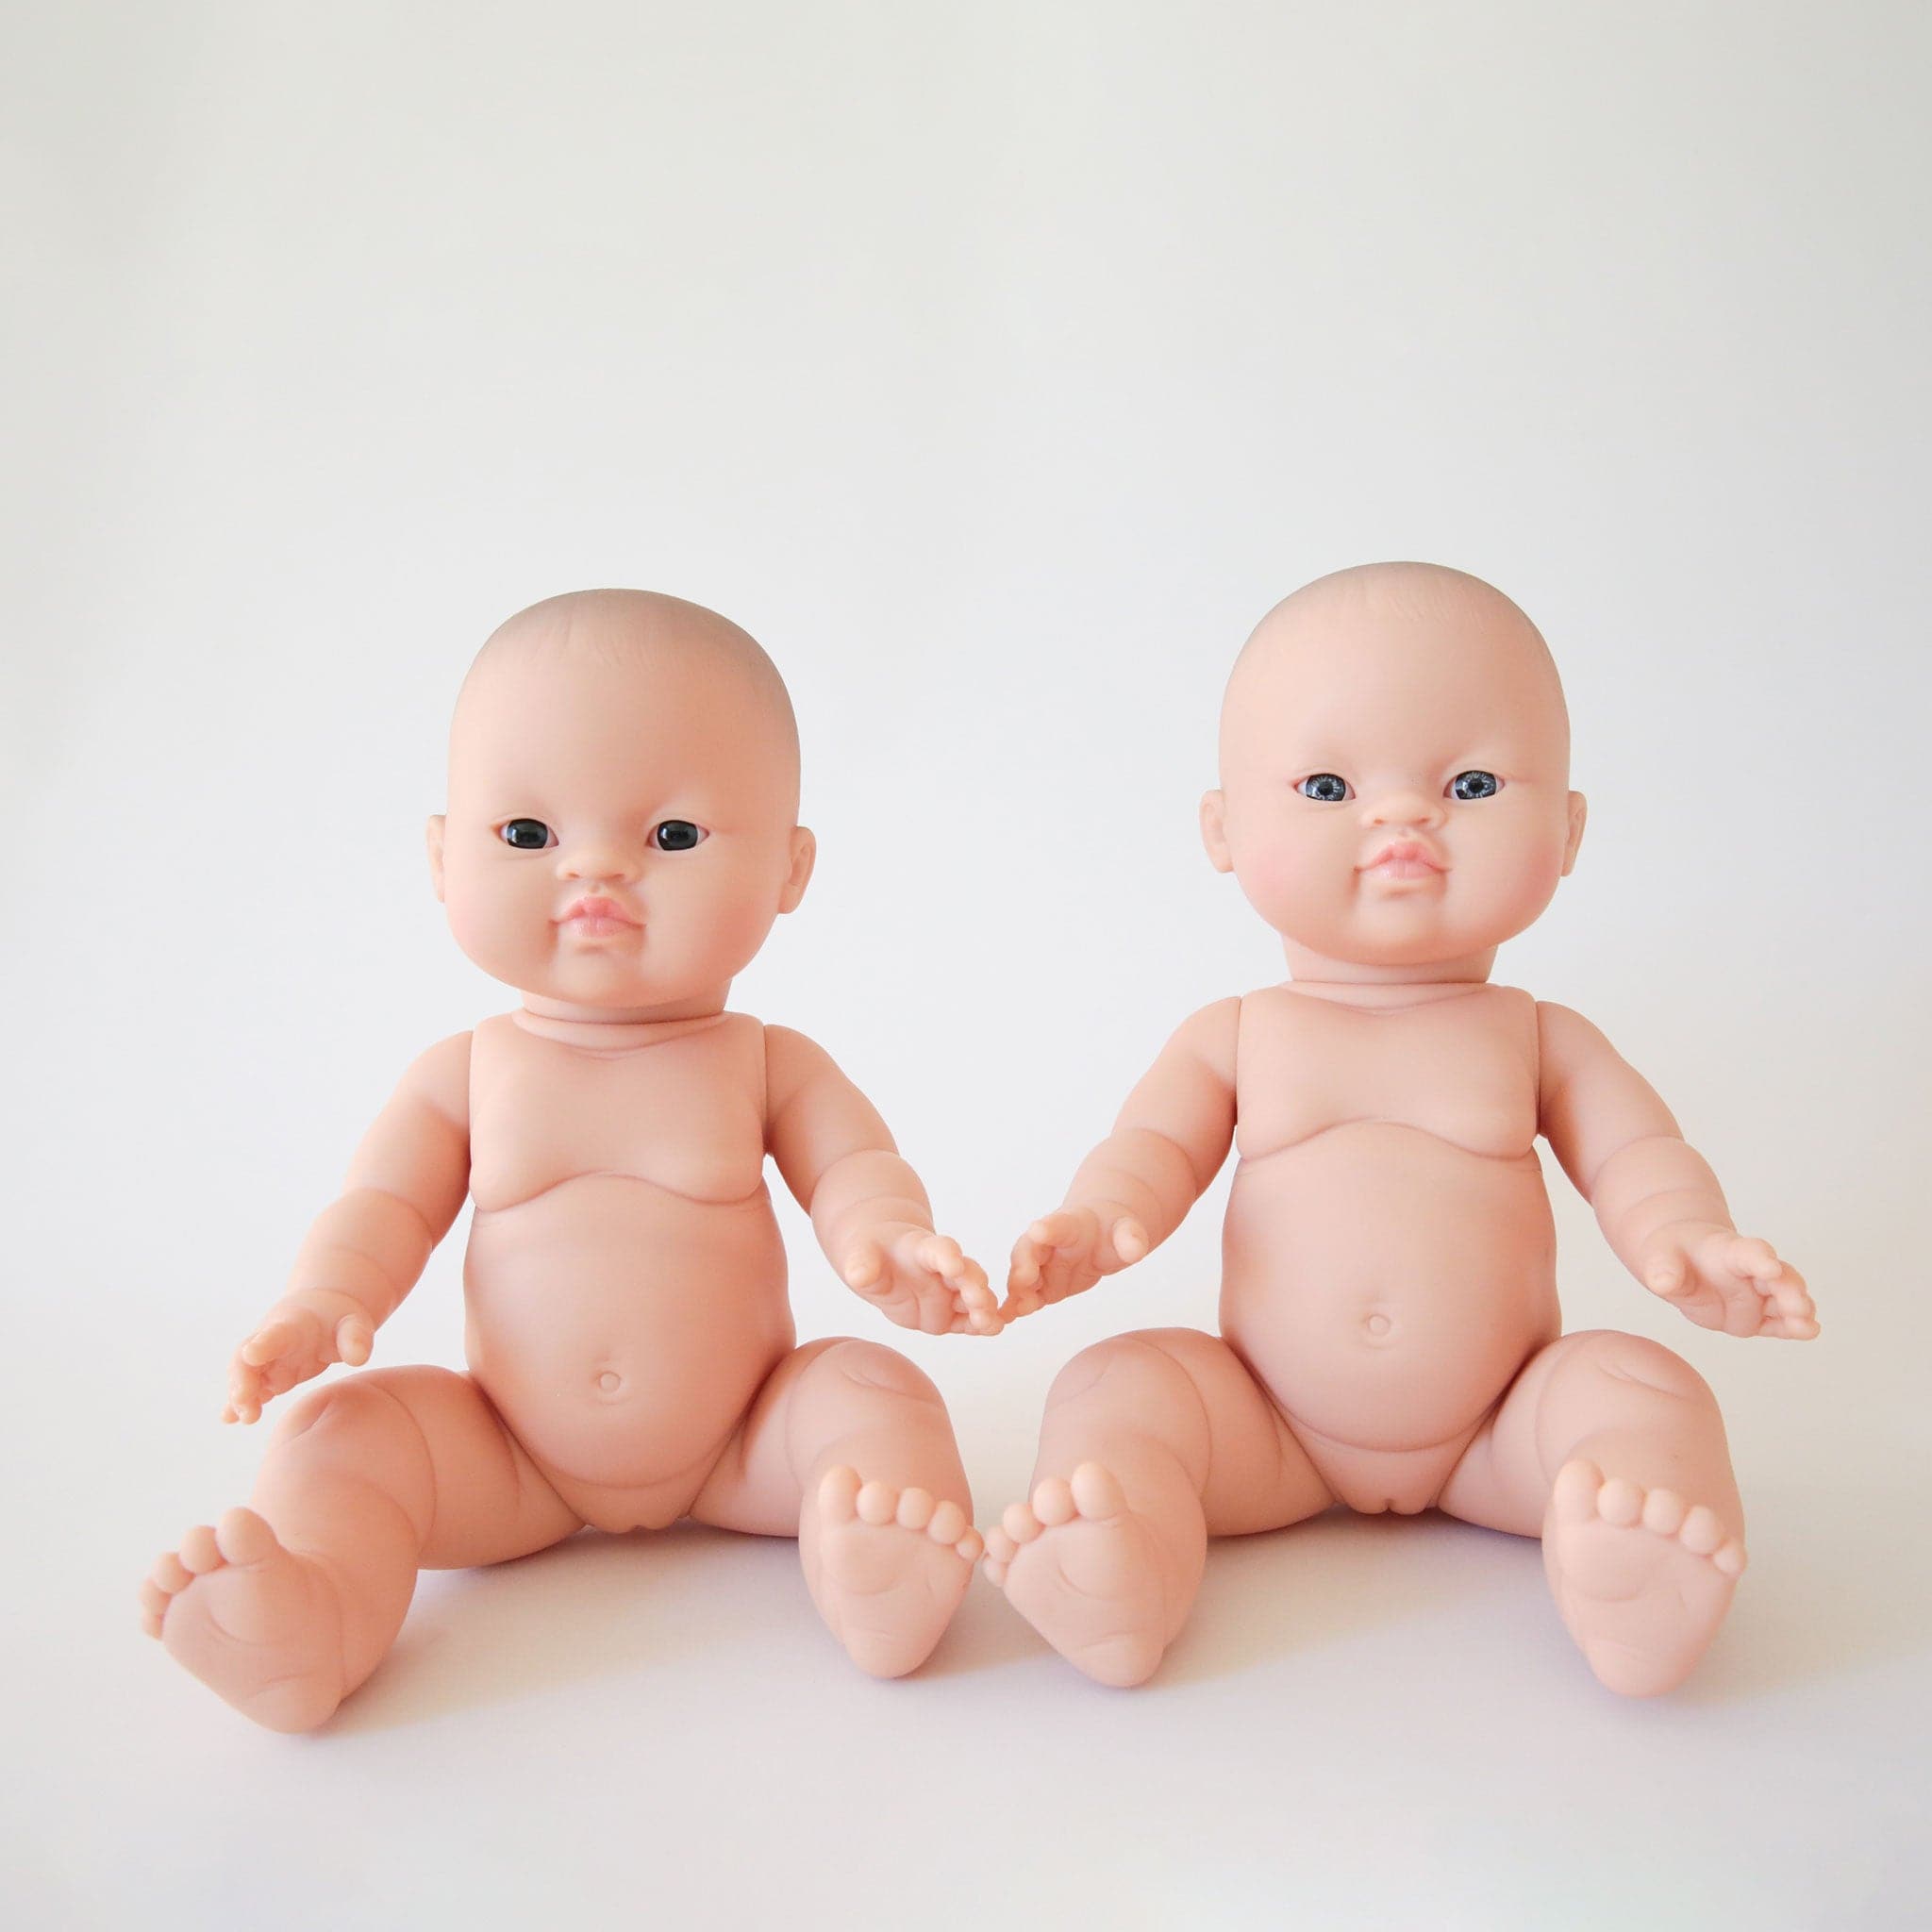 Two options of the baby dolls shown here, one with lighter blue eyes and the other with dark brown eyes.